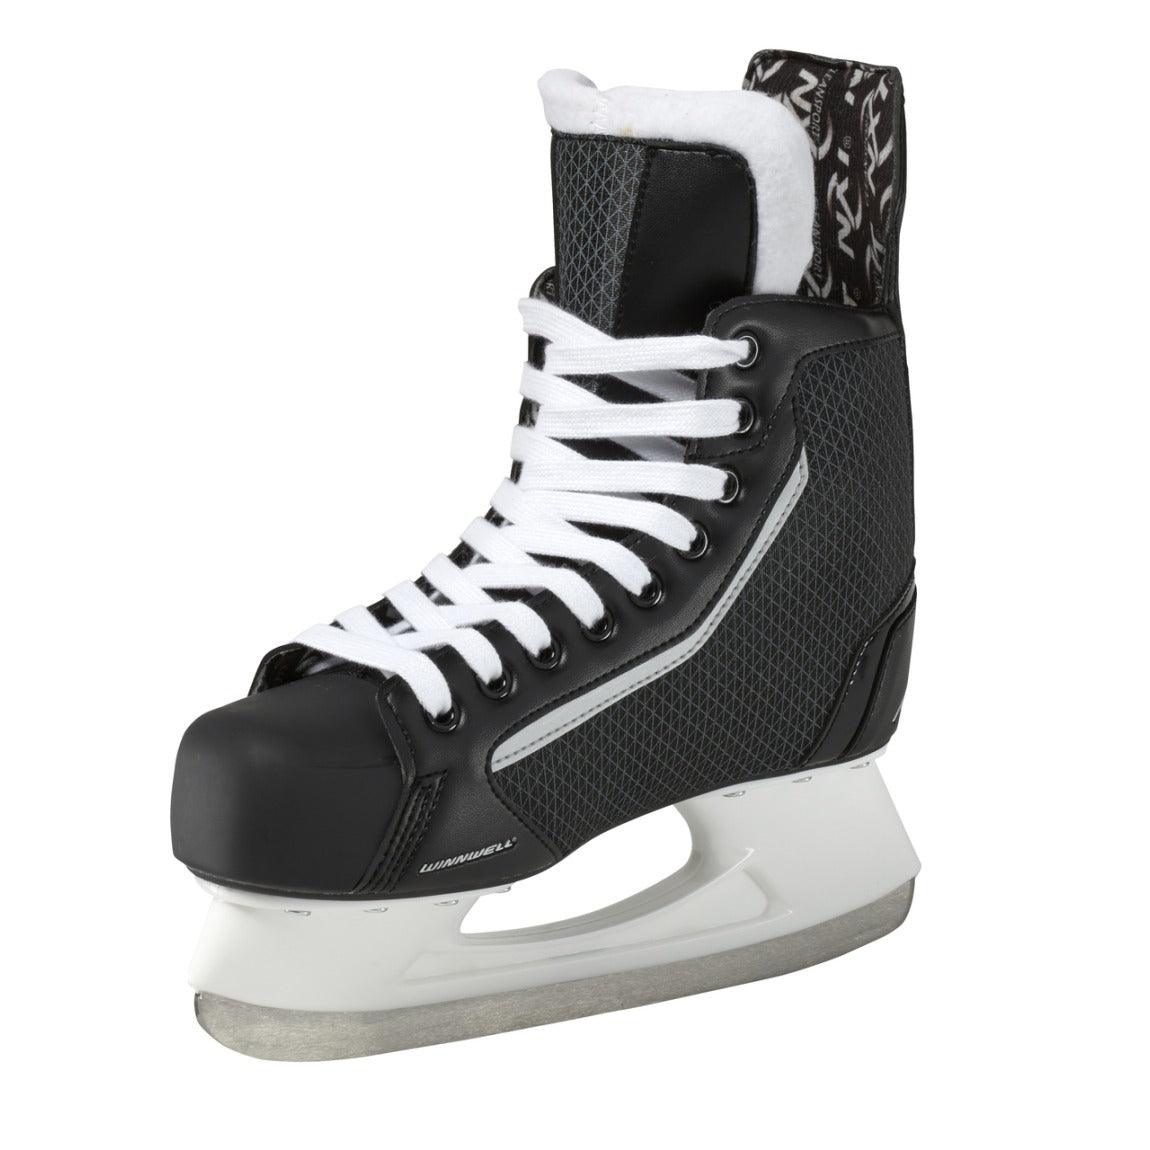 AMP300 Skate - Youth - Sports Excellence